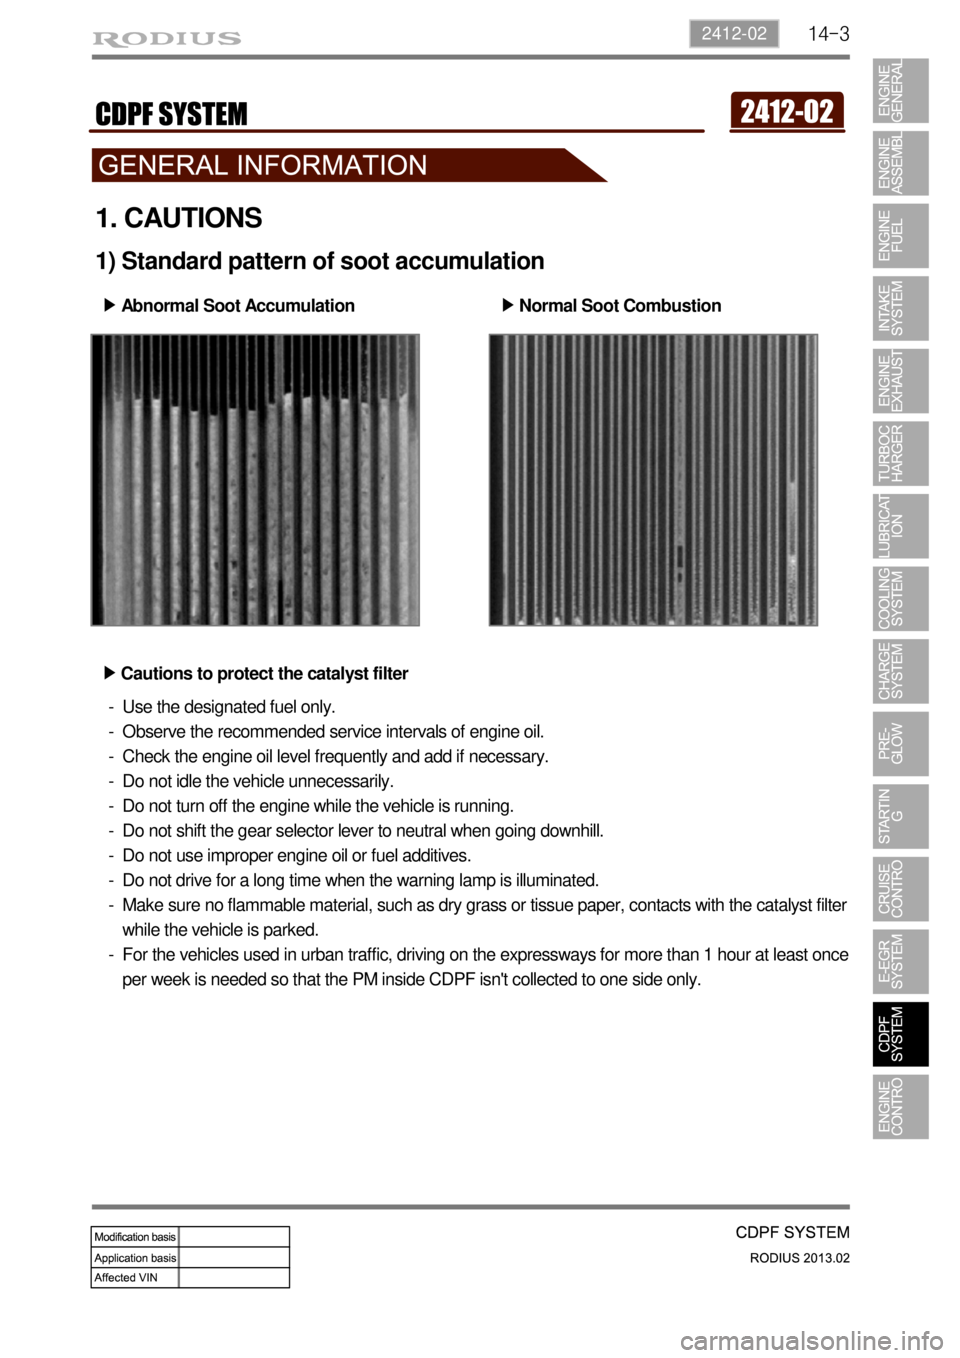 SSANGYONG TURISMO 2013  Service Manual 14-32412-02
1. CAUTIONS
1) Standard pattern of soot accumulation
Abnormal Soot Accumulation ▶
Normal Soot Combustion ▶
Cautions to protect the catalyst filter ▶
Use the designated fuel only.    